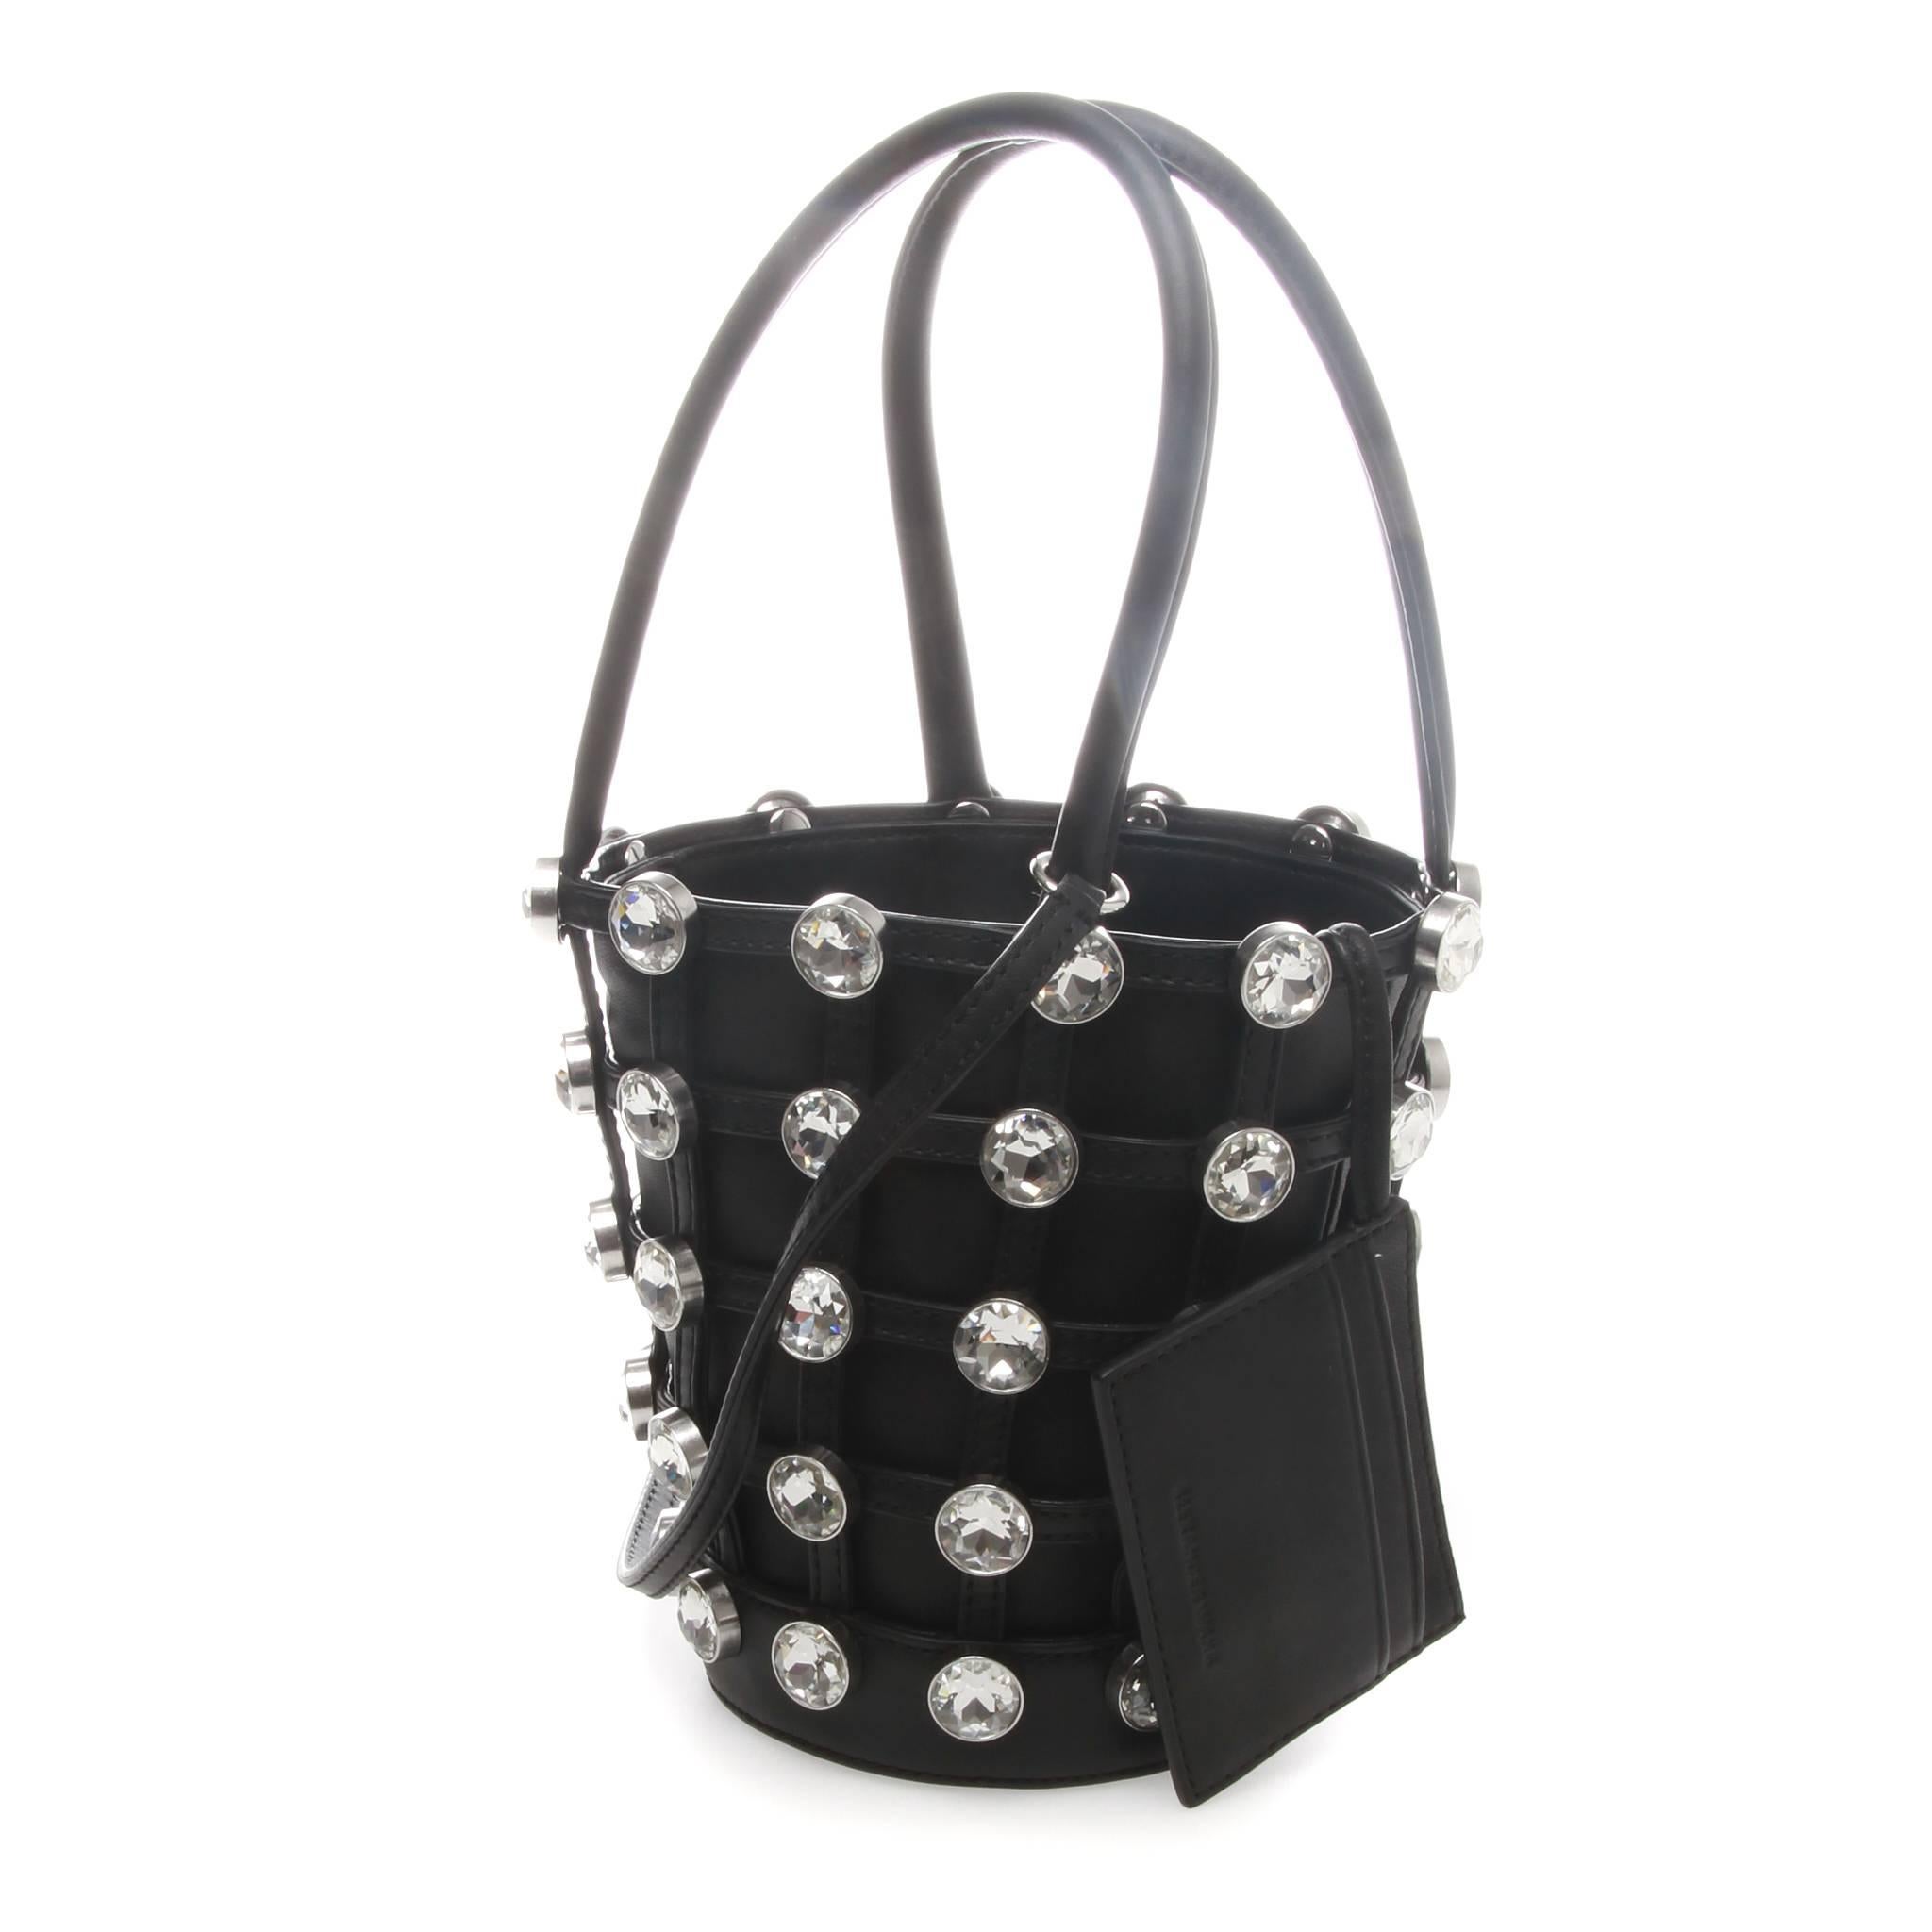 Alexander Wang mini Roxy top handle bucket bag in black nappa leather. Cage-style overlay featuring crystal-cut detailing throughout. Twin rolled carry handles. Lanyard with hoop hardware at handle base. Leather card holder on lanyard at interior.